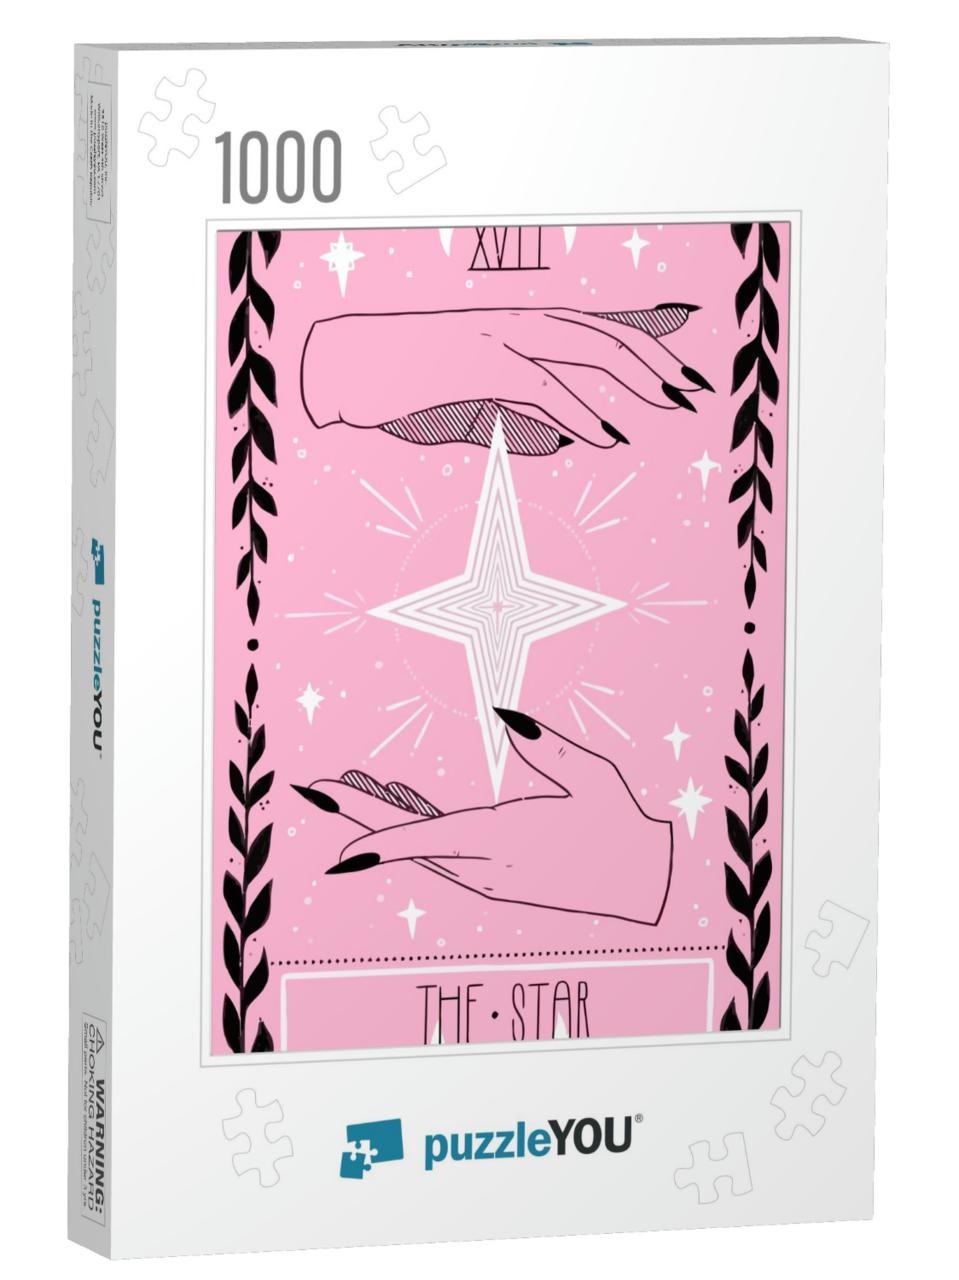 Tarot Pink Black Fortune Telling Card Illustration... Jigsaw Puzzle with 1000 pieces